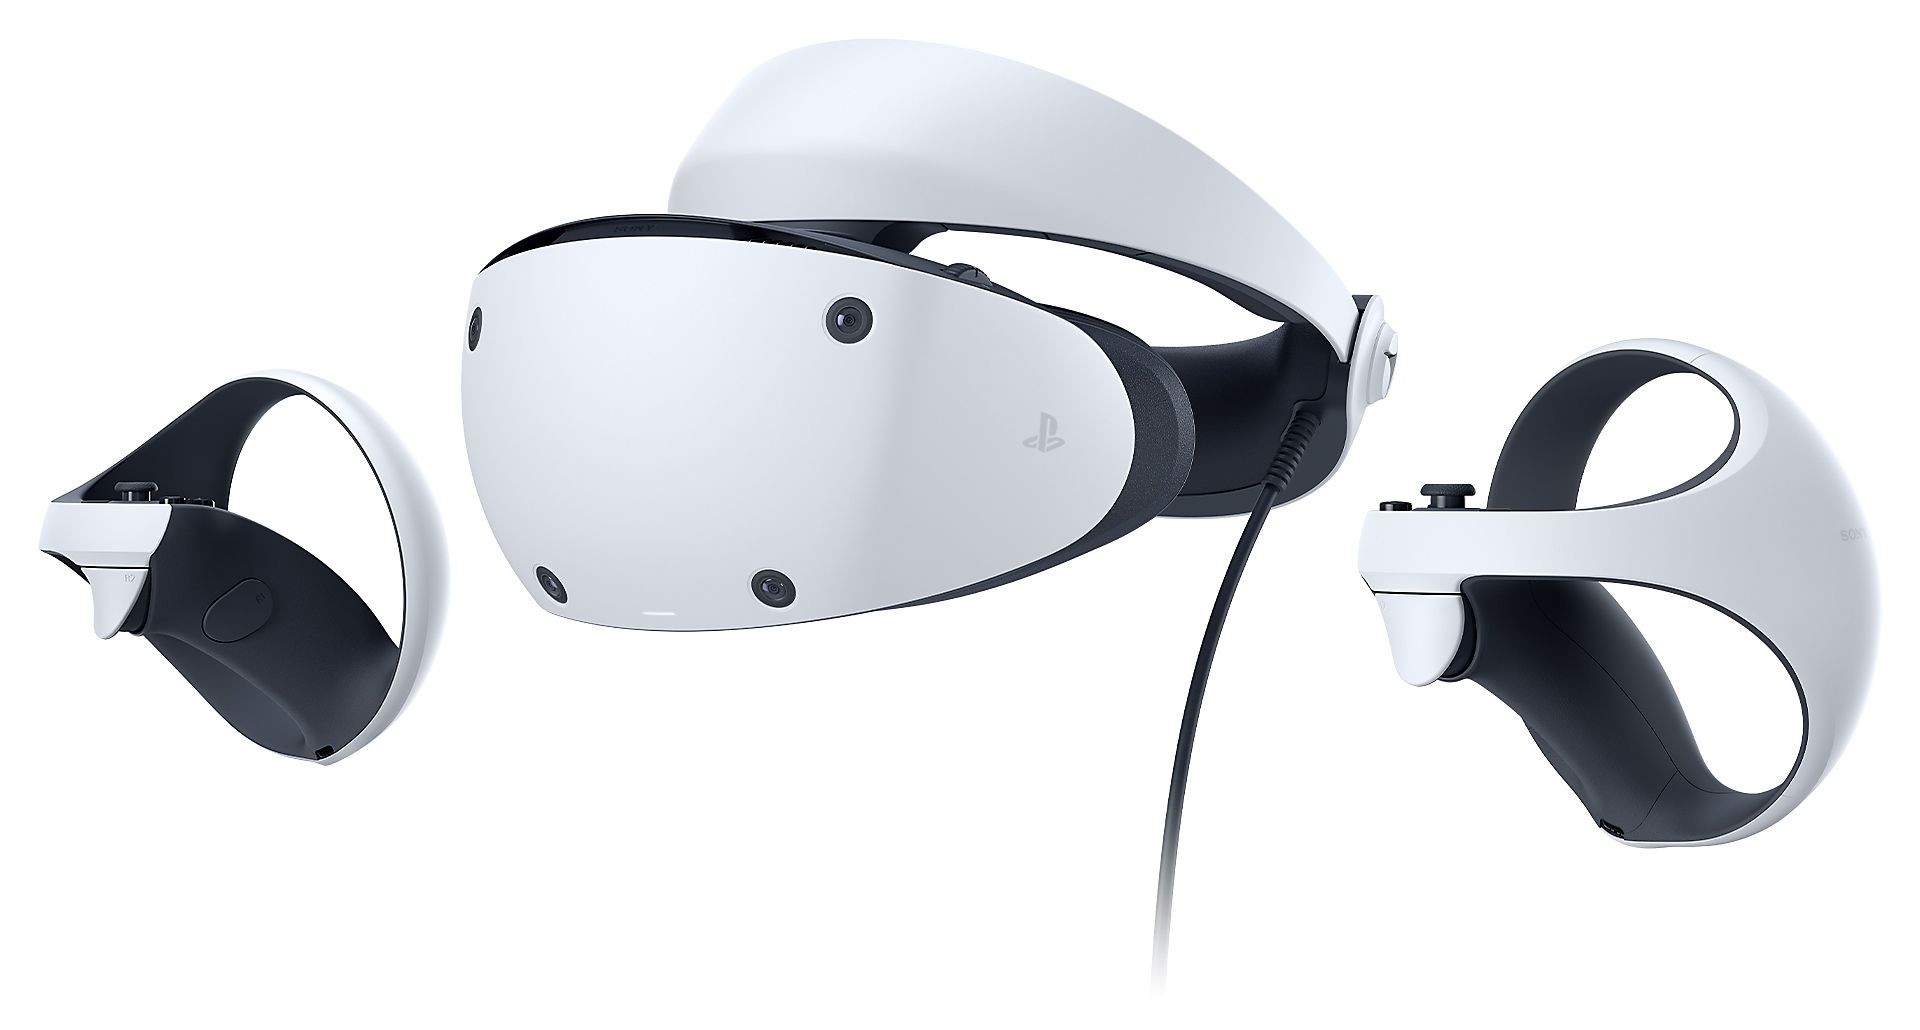 psvr2-headset-controllers